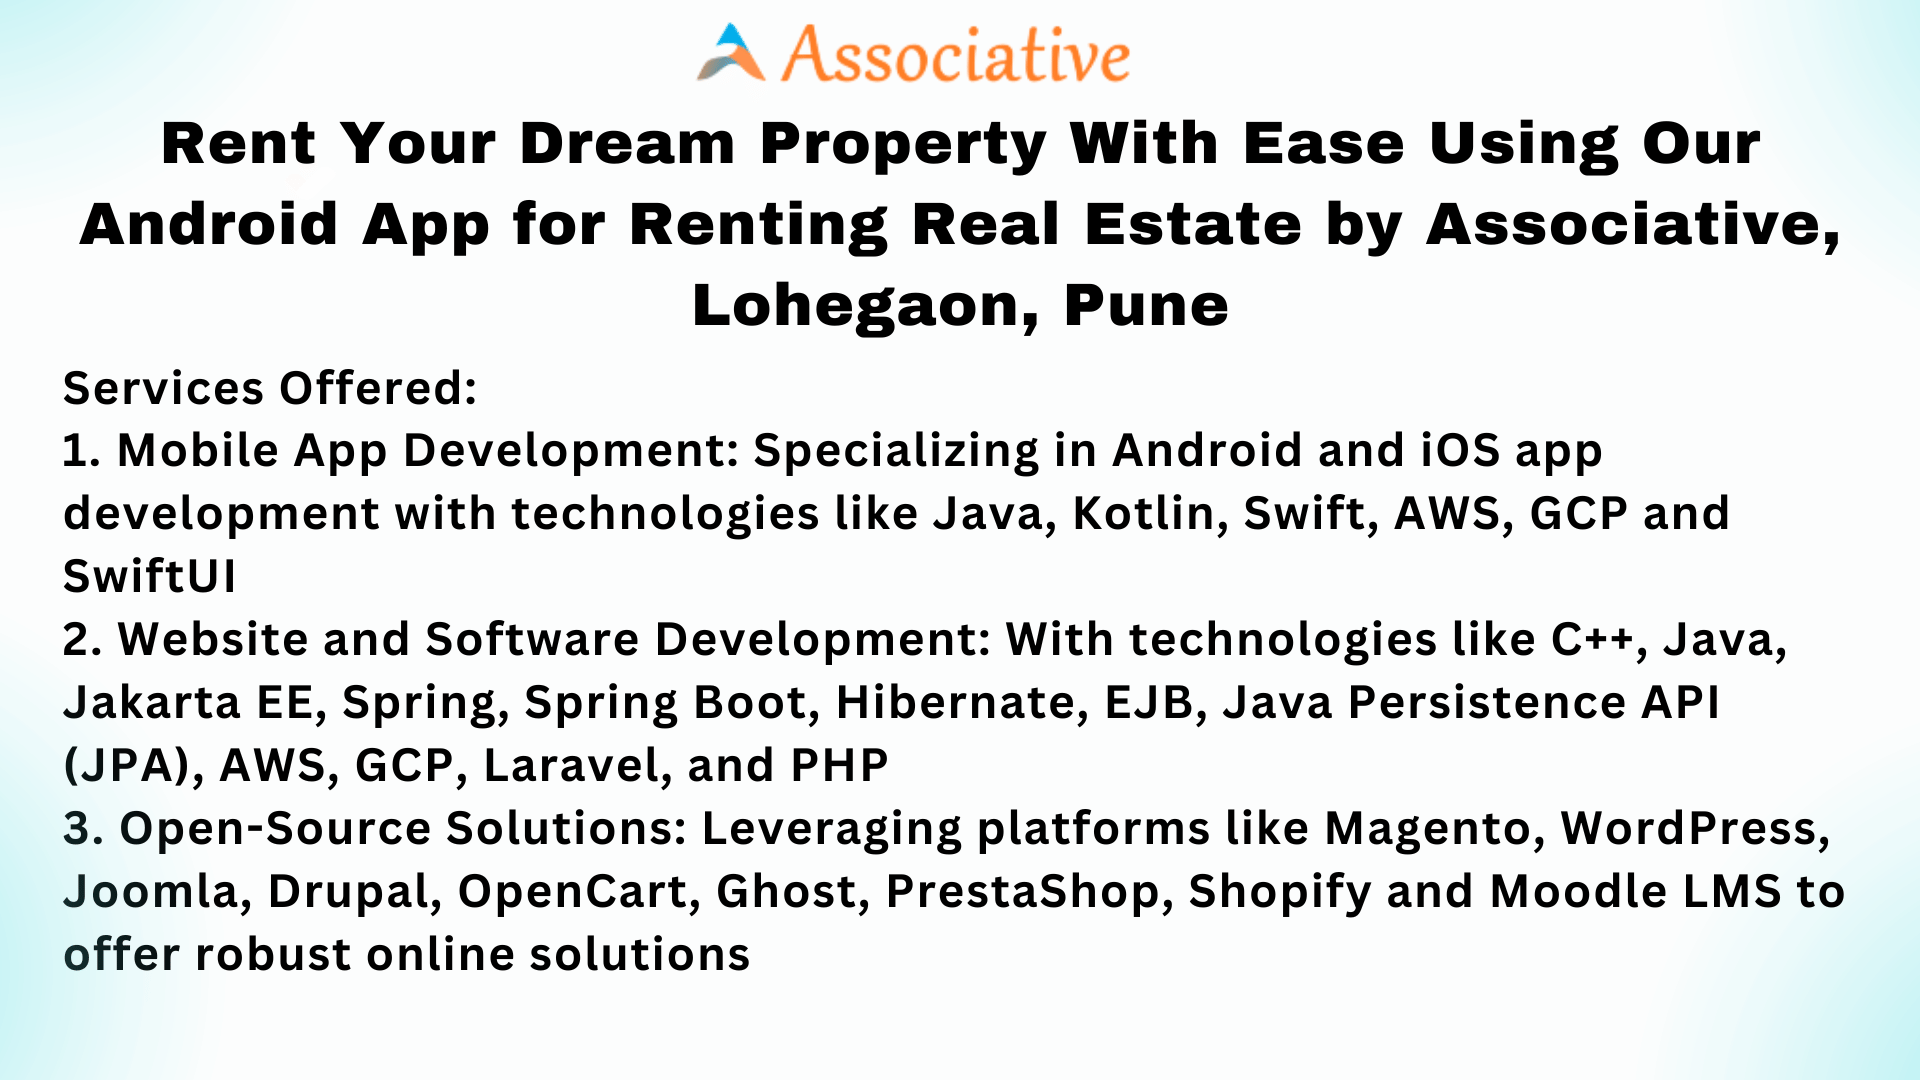 Rent Your Dream Property With Ease Using Our Android App for Renting Real Estate by Associative, Lohegaon, Pune